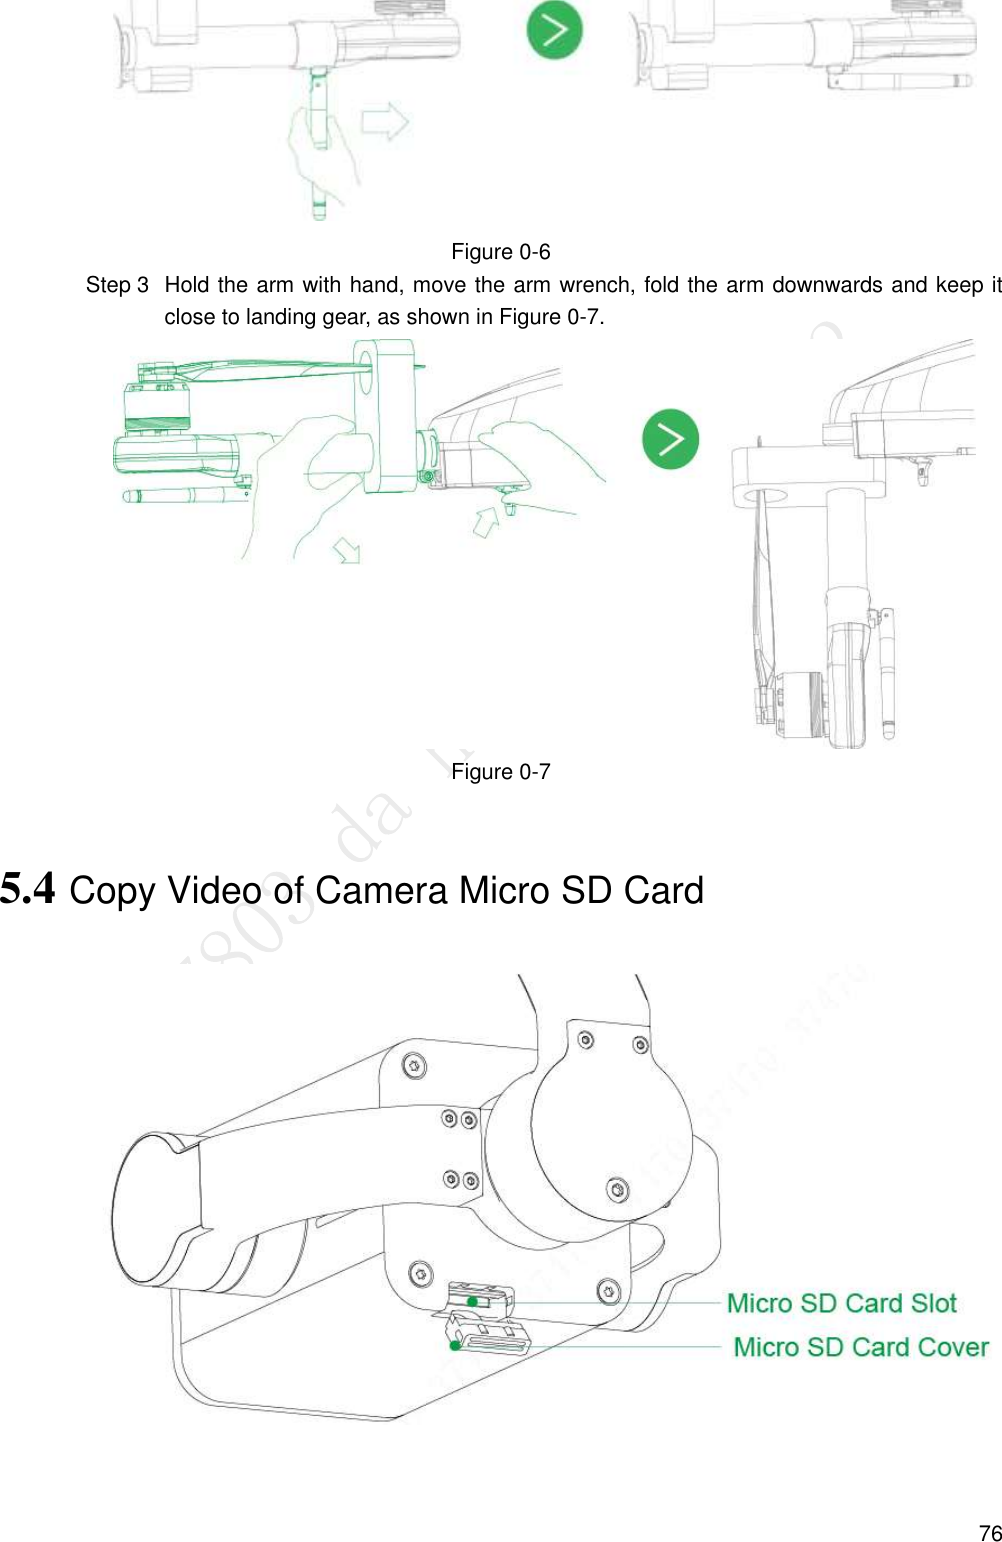  76  Figure 0-6   Hold the arm with hand, move the arm wrench, fold the arm downwards and keep it Step 3close to landing gear, as shown in Figure 0-7.  Figure 0-7 5.4 Copy Video of Camera Micro SD Card  